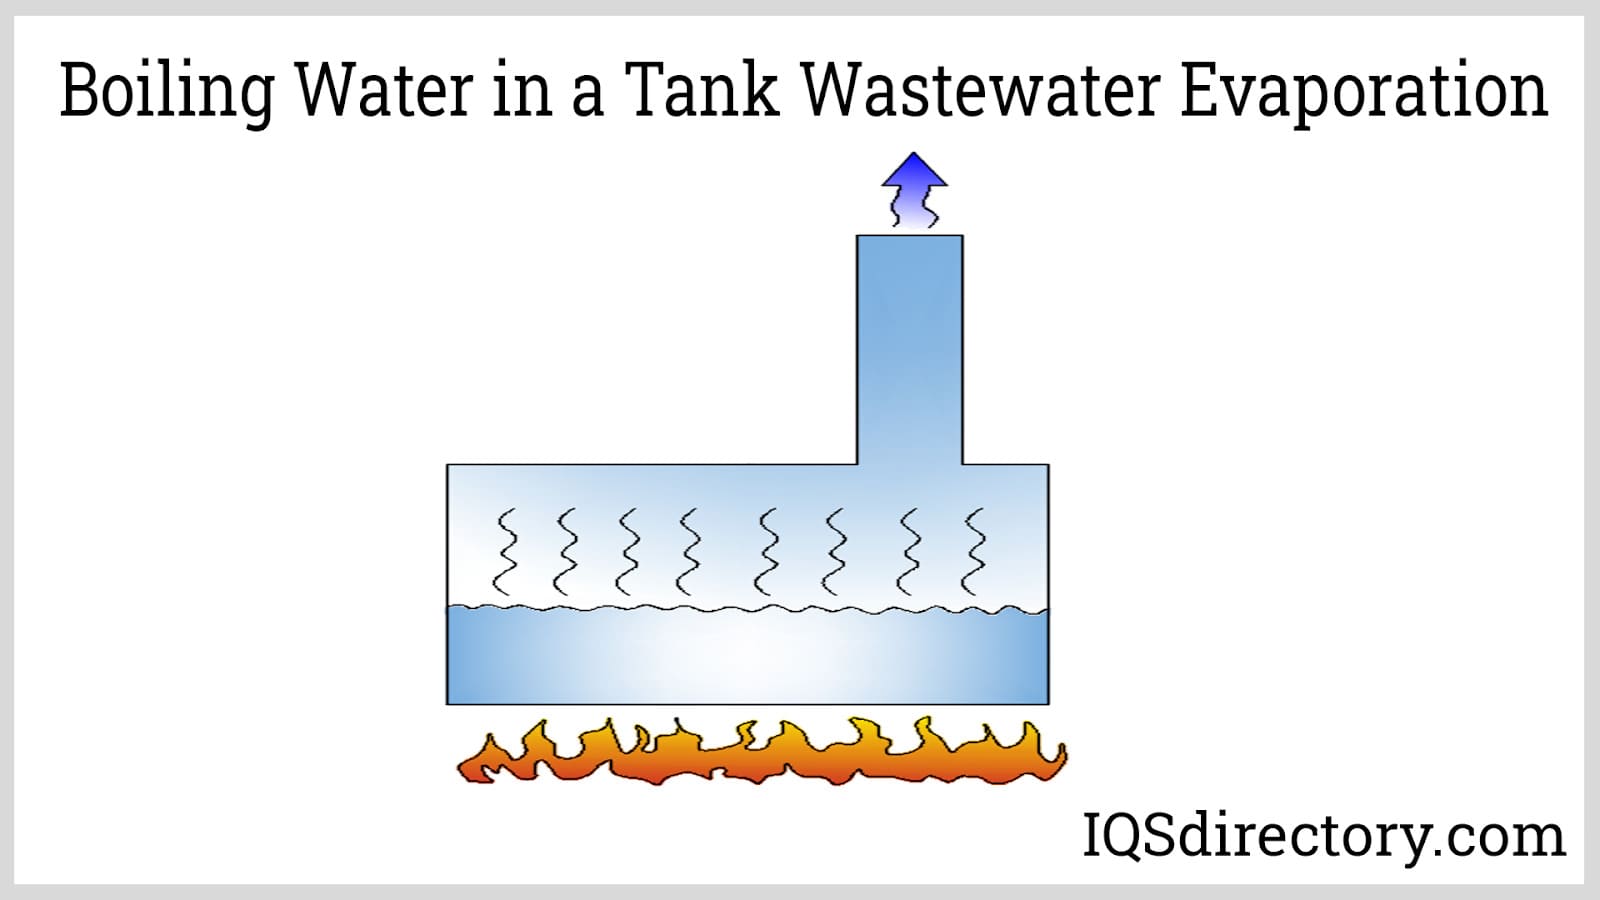 Boiling Water in a Tank Wastewater Evaporation